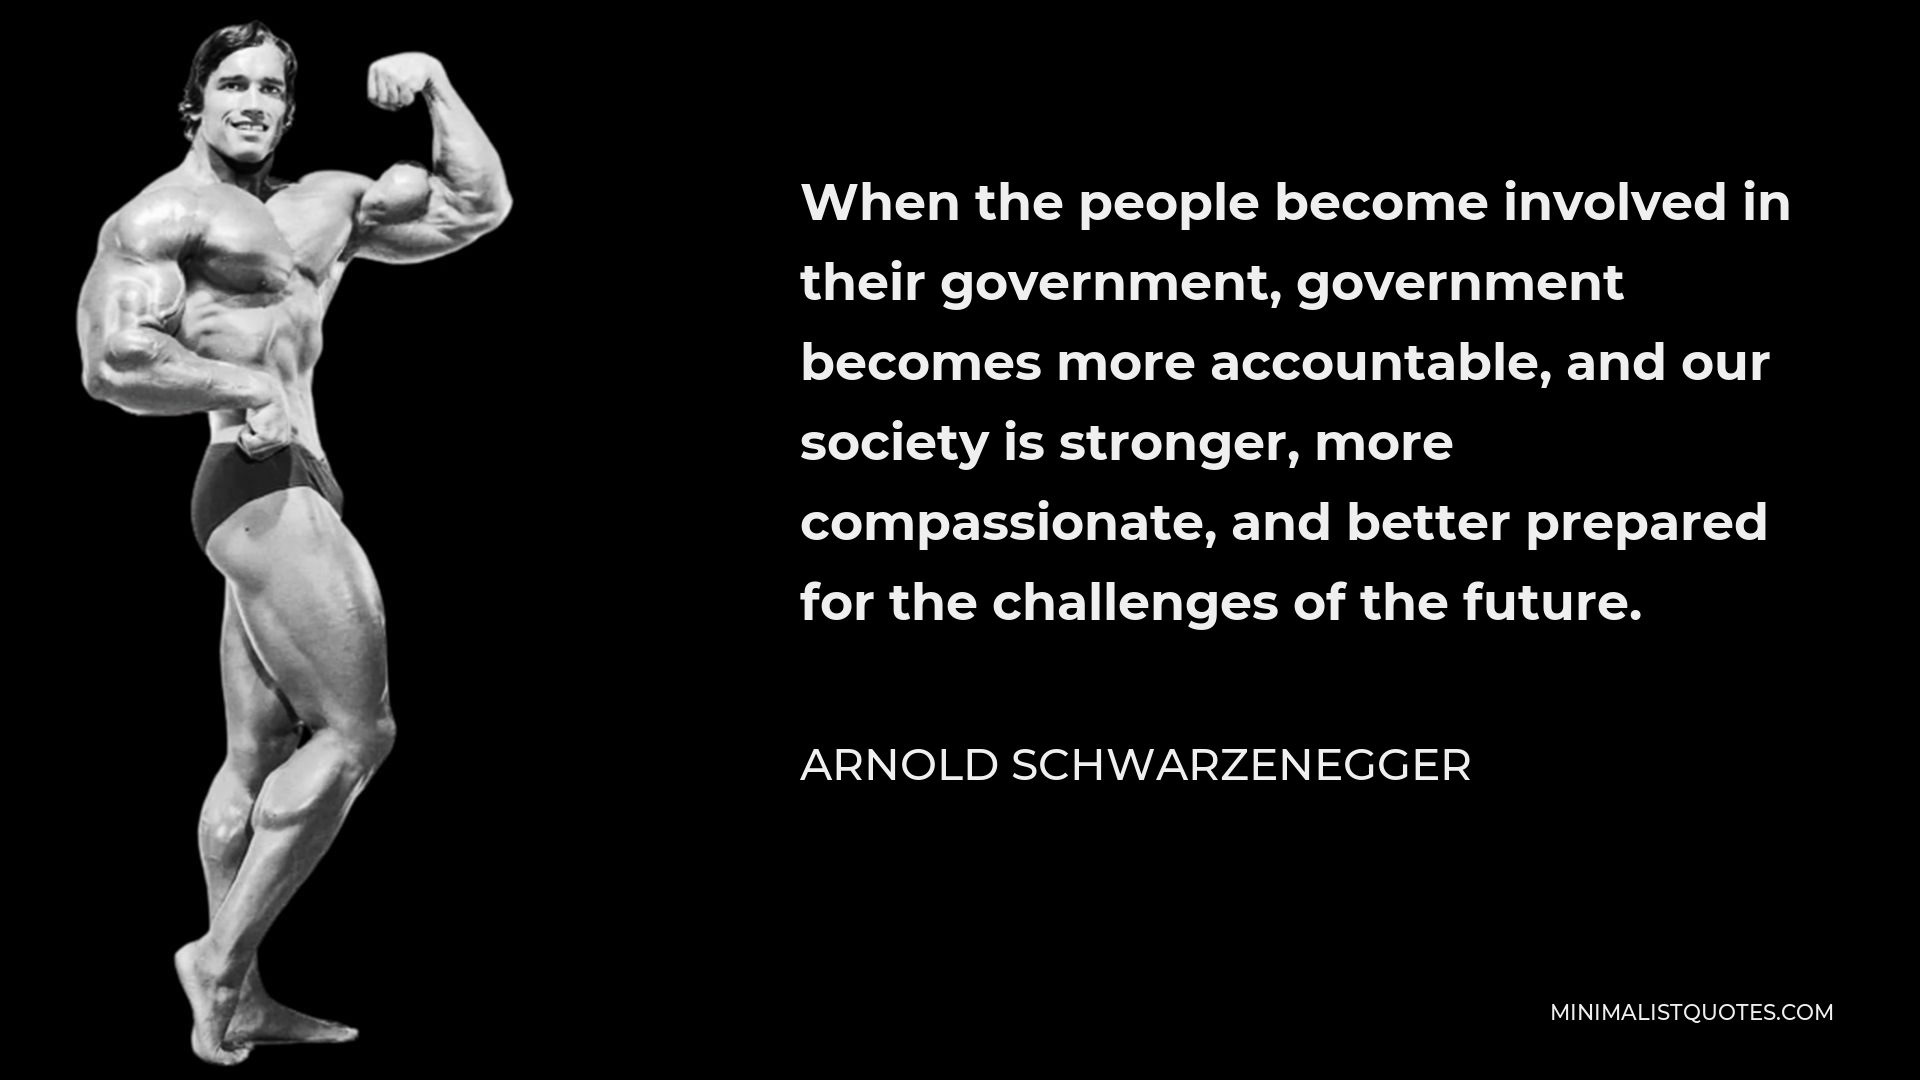 Arnold Schwarzenegger Quote - When the people become involved in their government, government becomes more accountable, and our society is stronger, more compassionate, and better prepared for the challenges of the future.